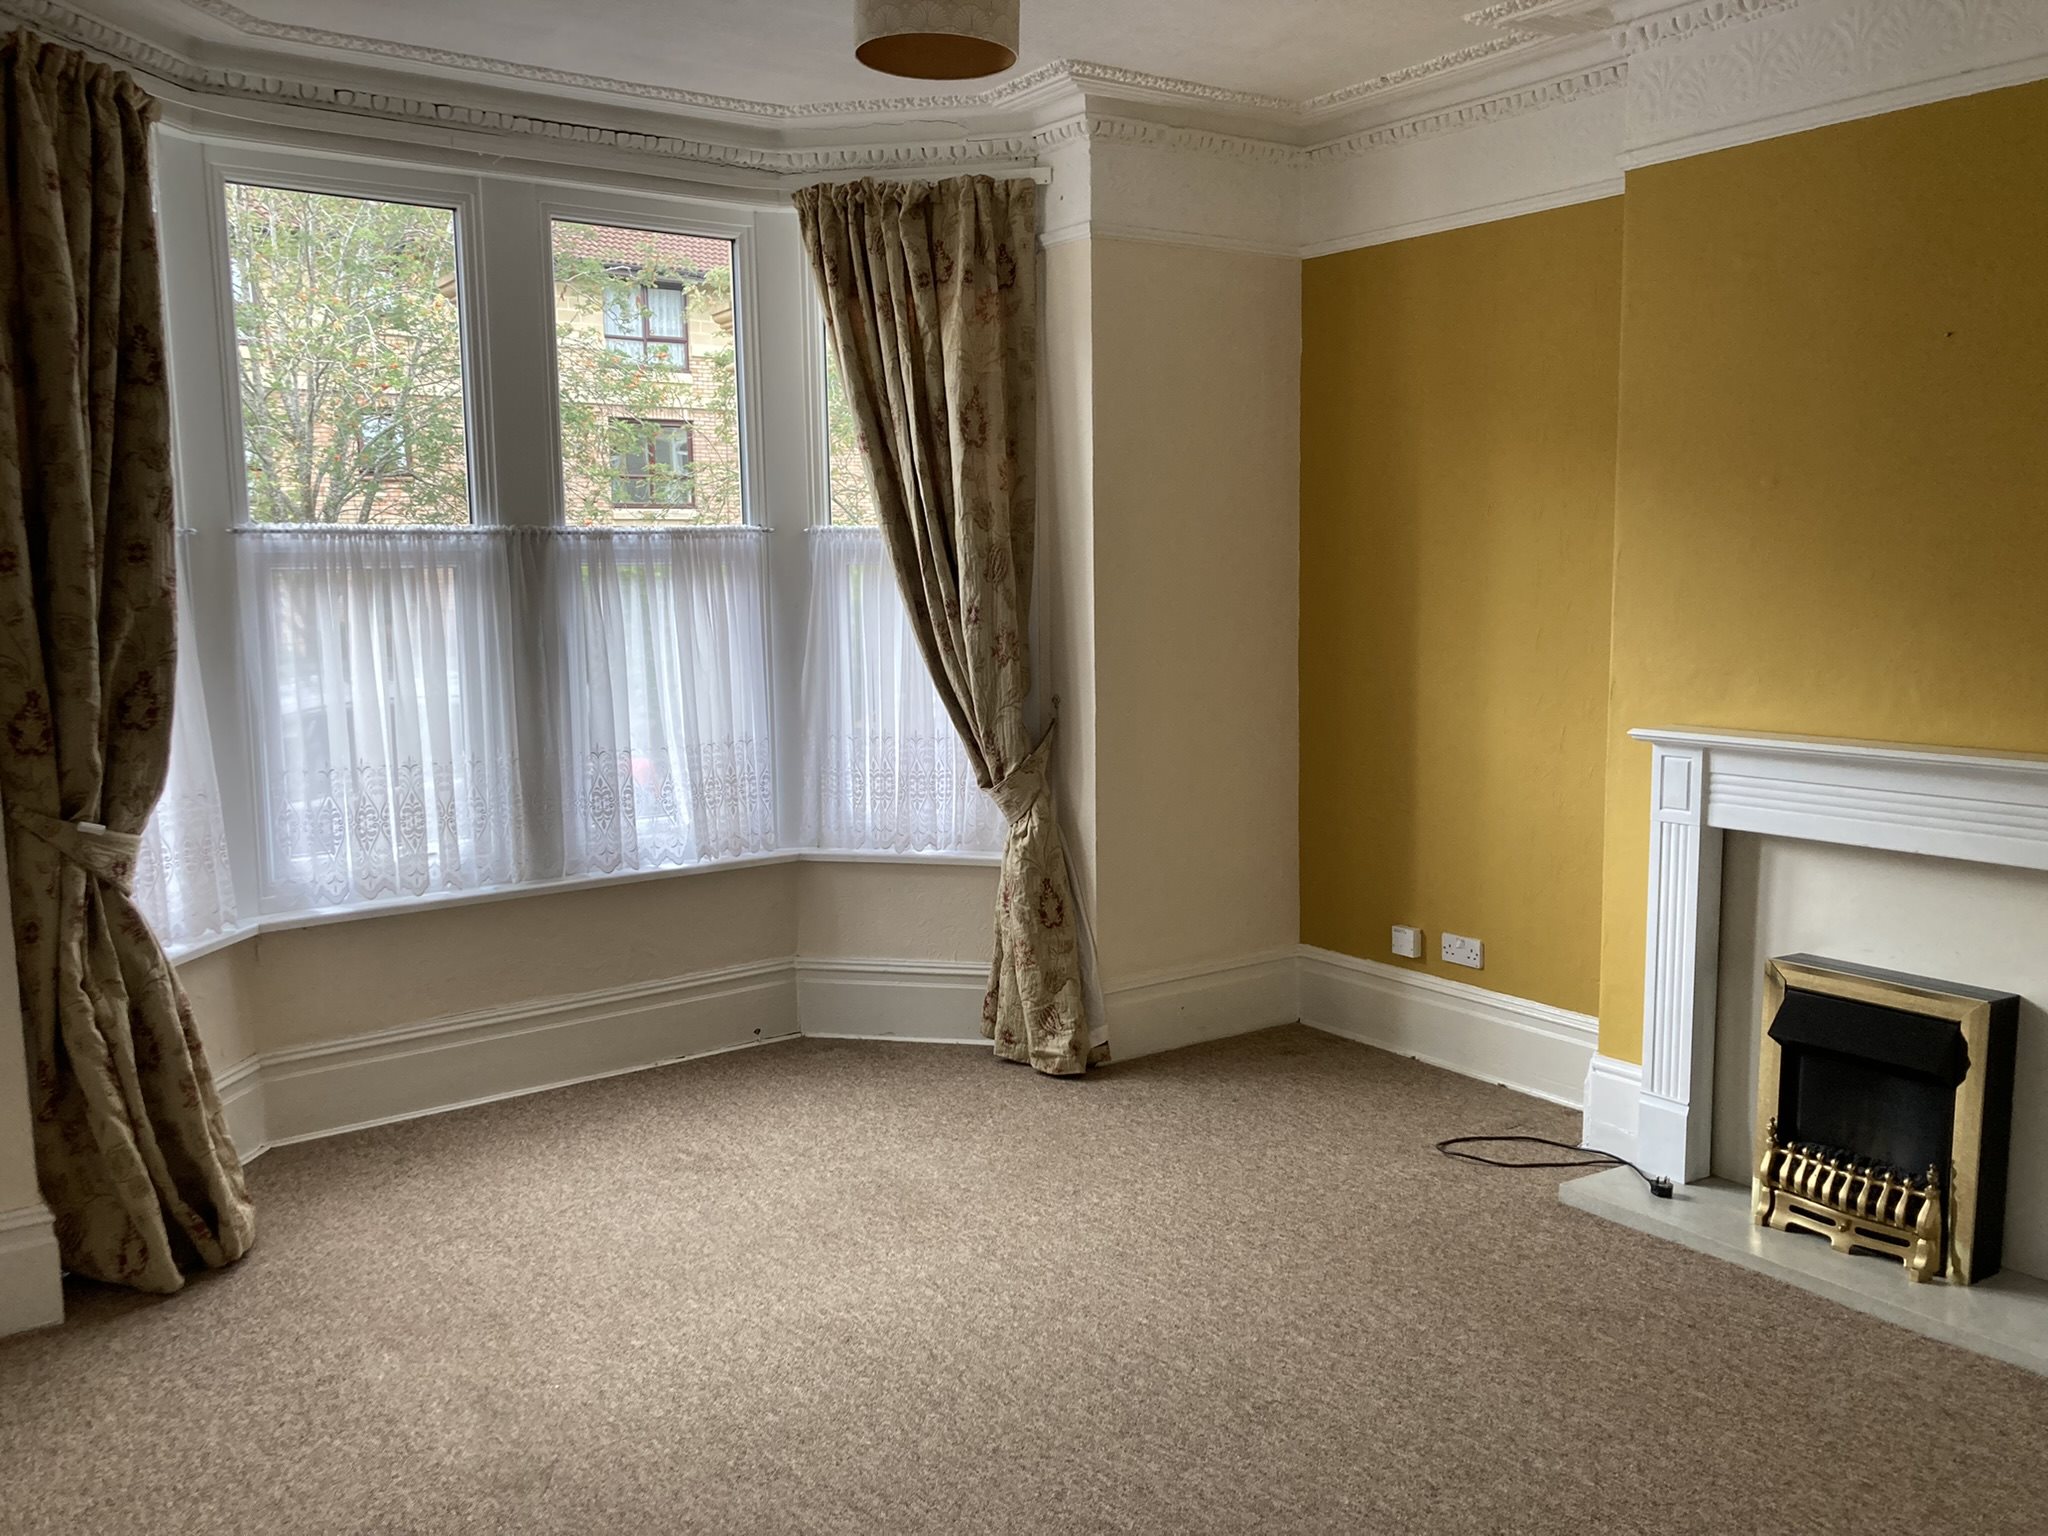 4 bed house to rent in Glebe Road, St George  - Property Image 1